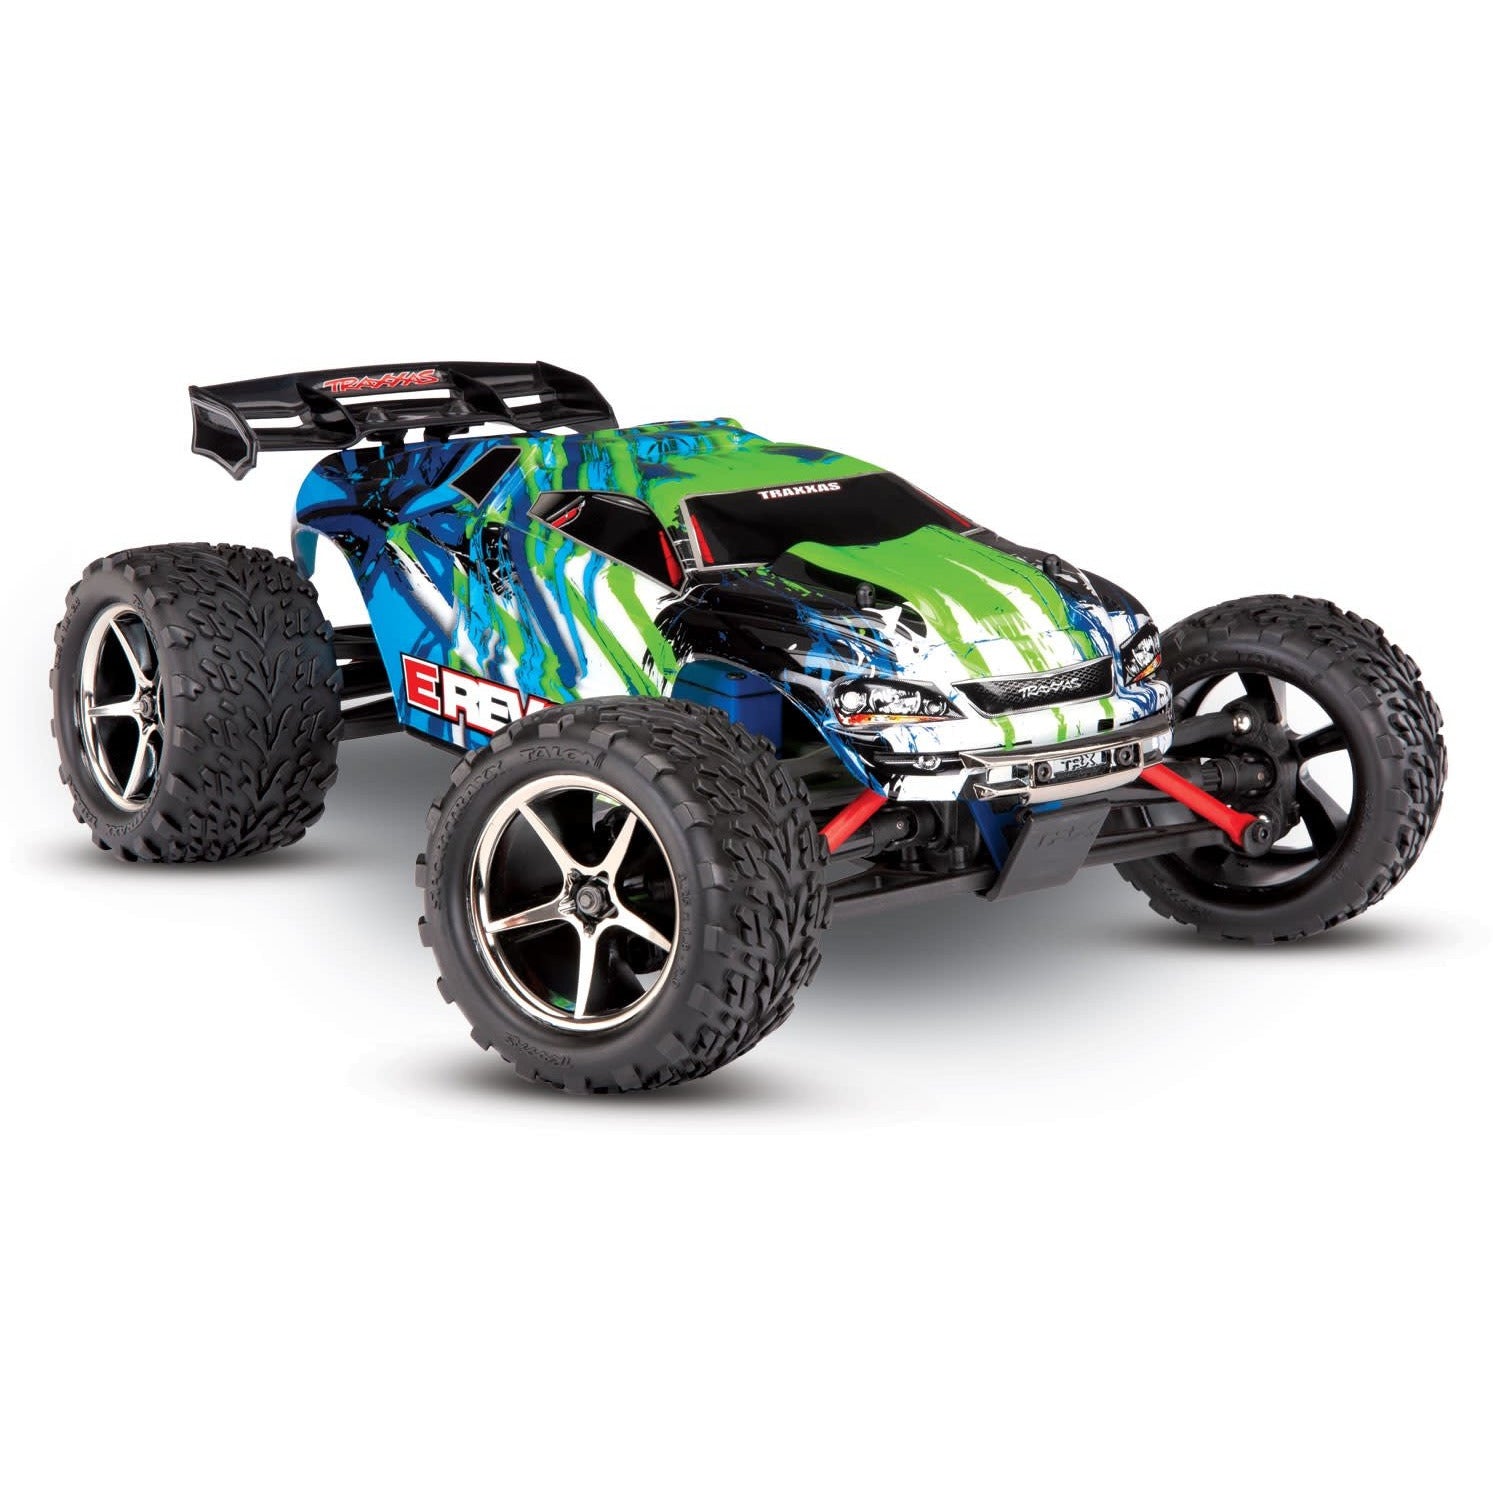 Traxxas 1/16 4WD Racing Monster Truck RTR Brushed E-Revo - Green TRA71054-1GREEN